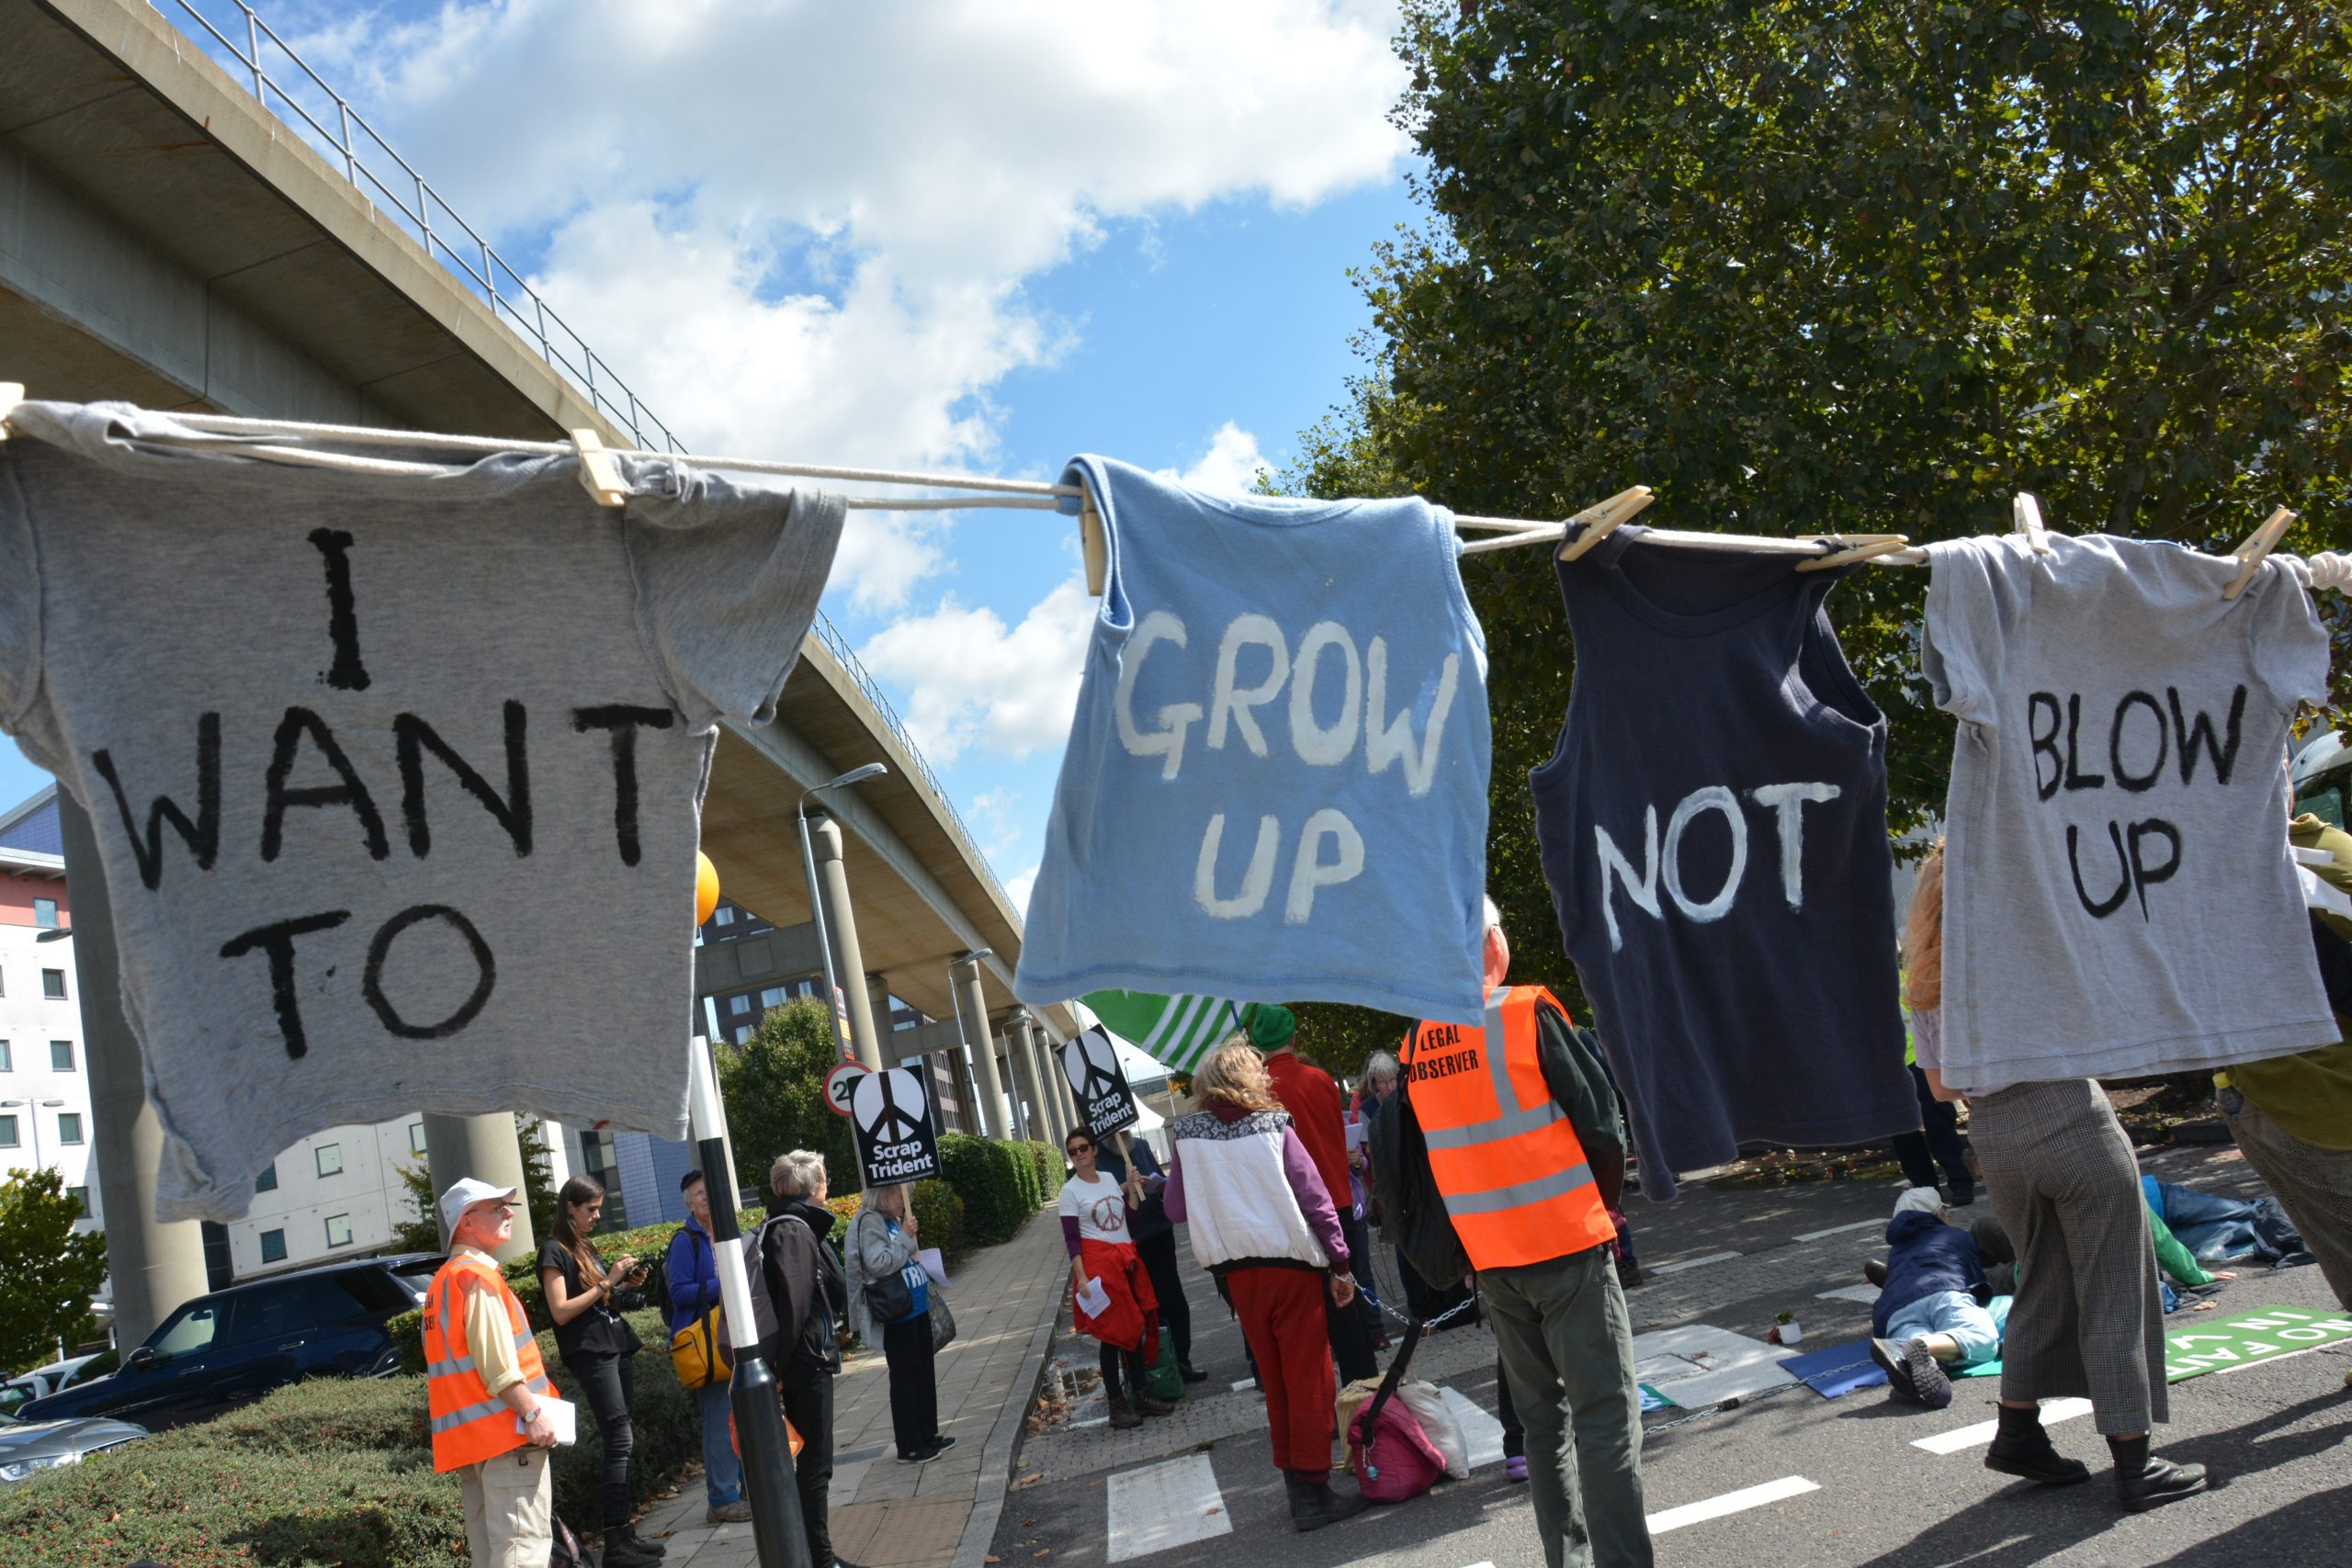 Children's clothes hanging outside DSEI that read 'I want to grow up not blow up'